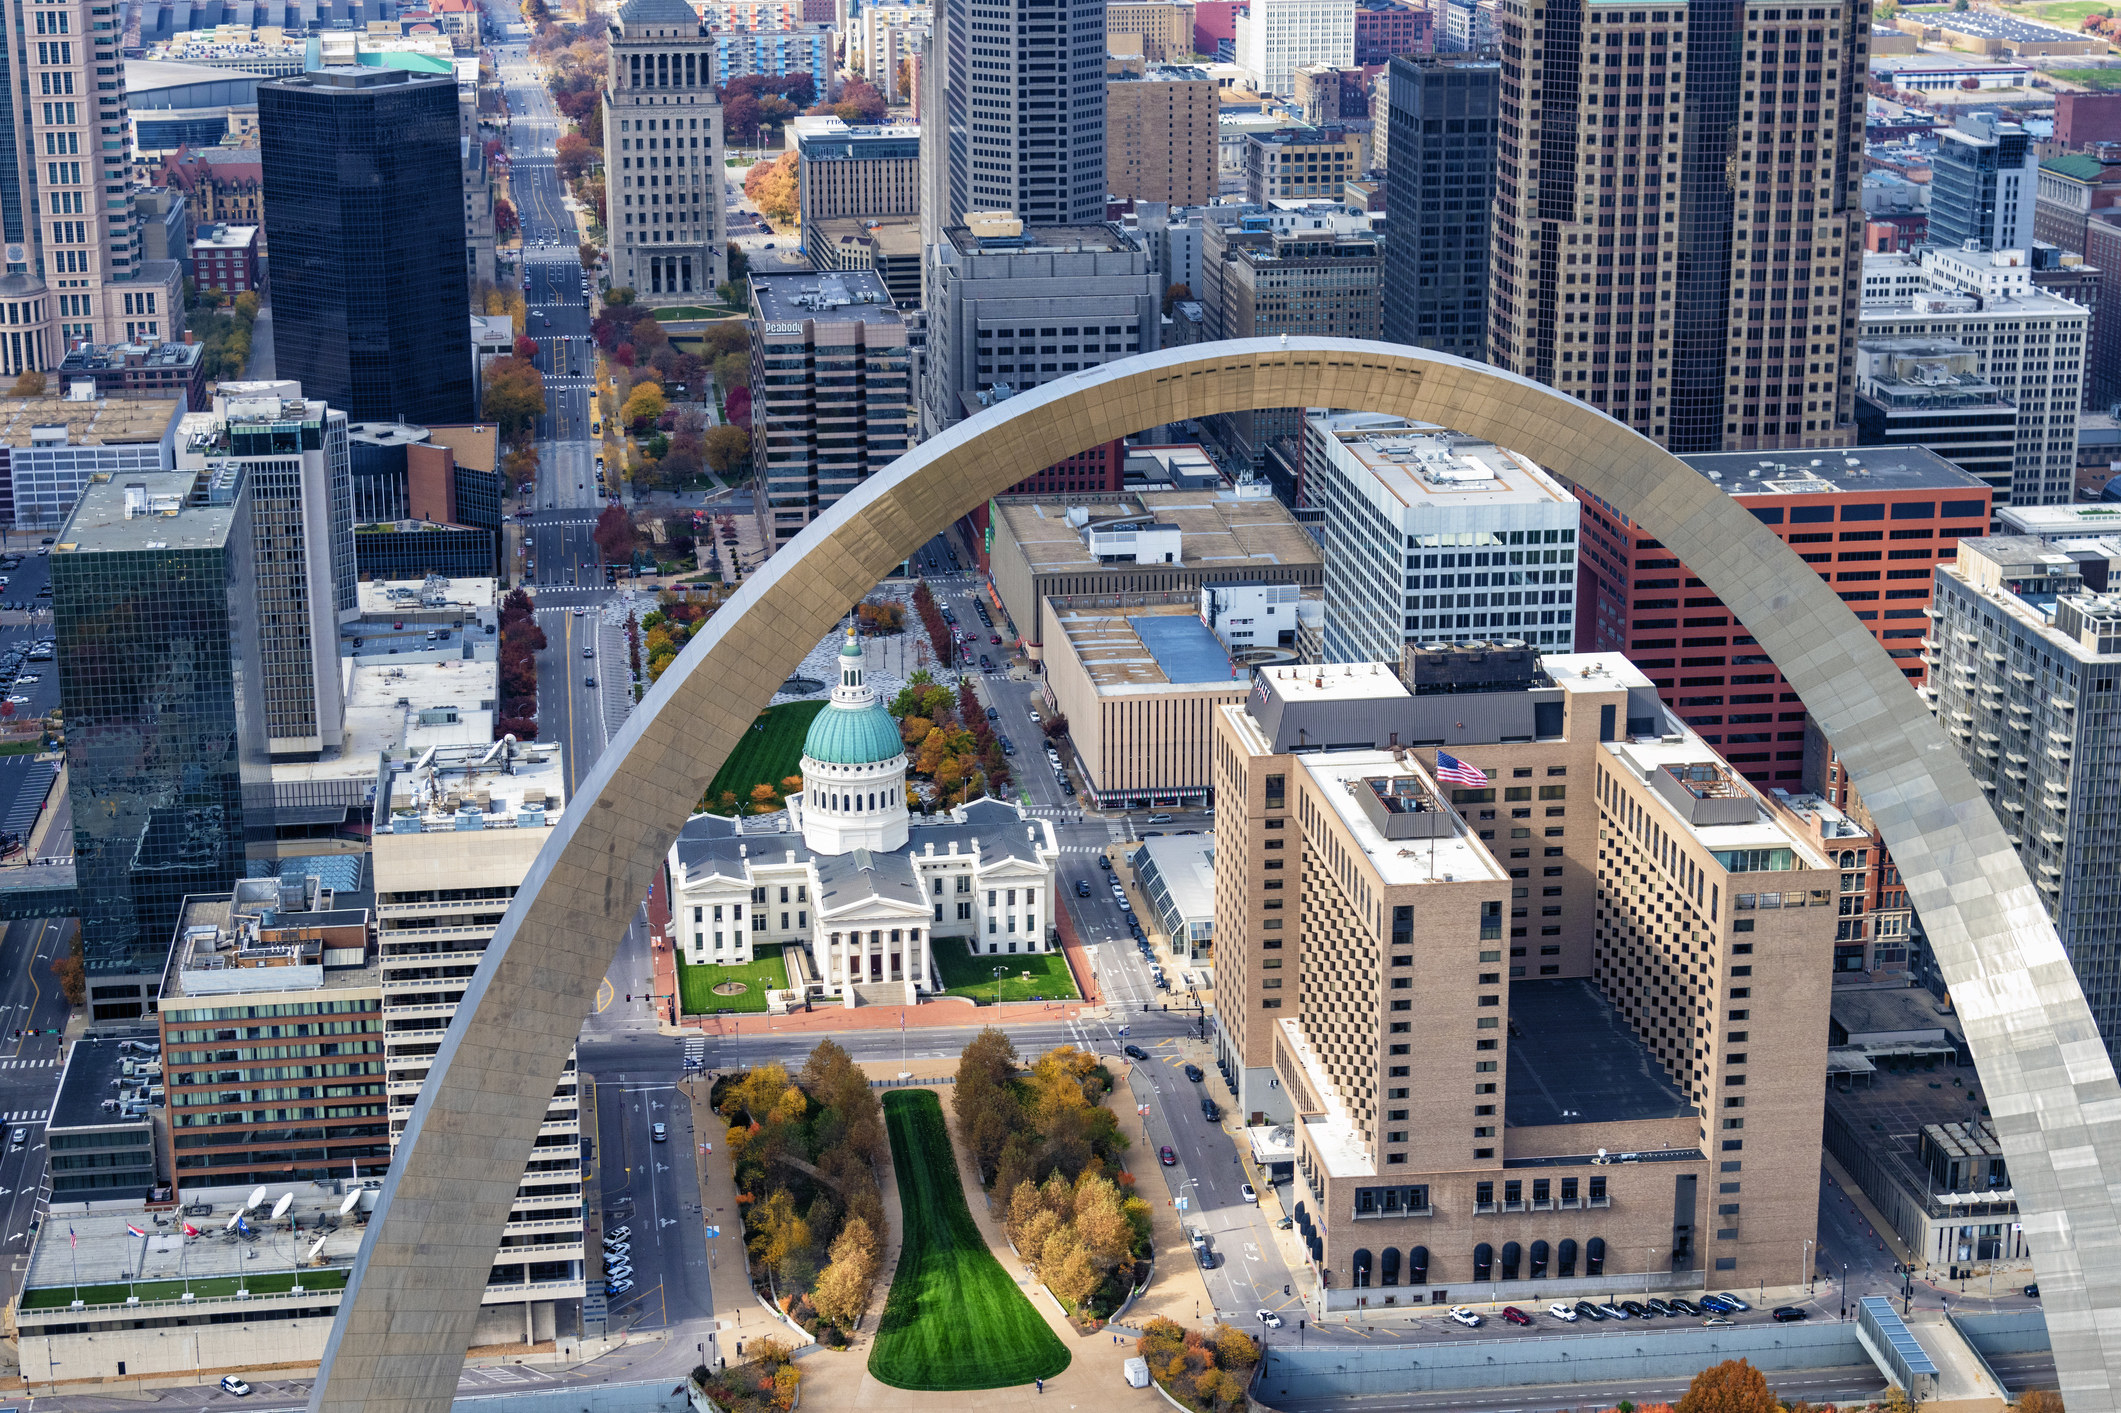 Downtown St. Louis and the Arch.